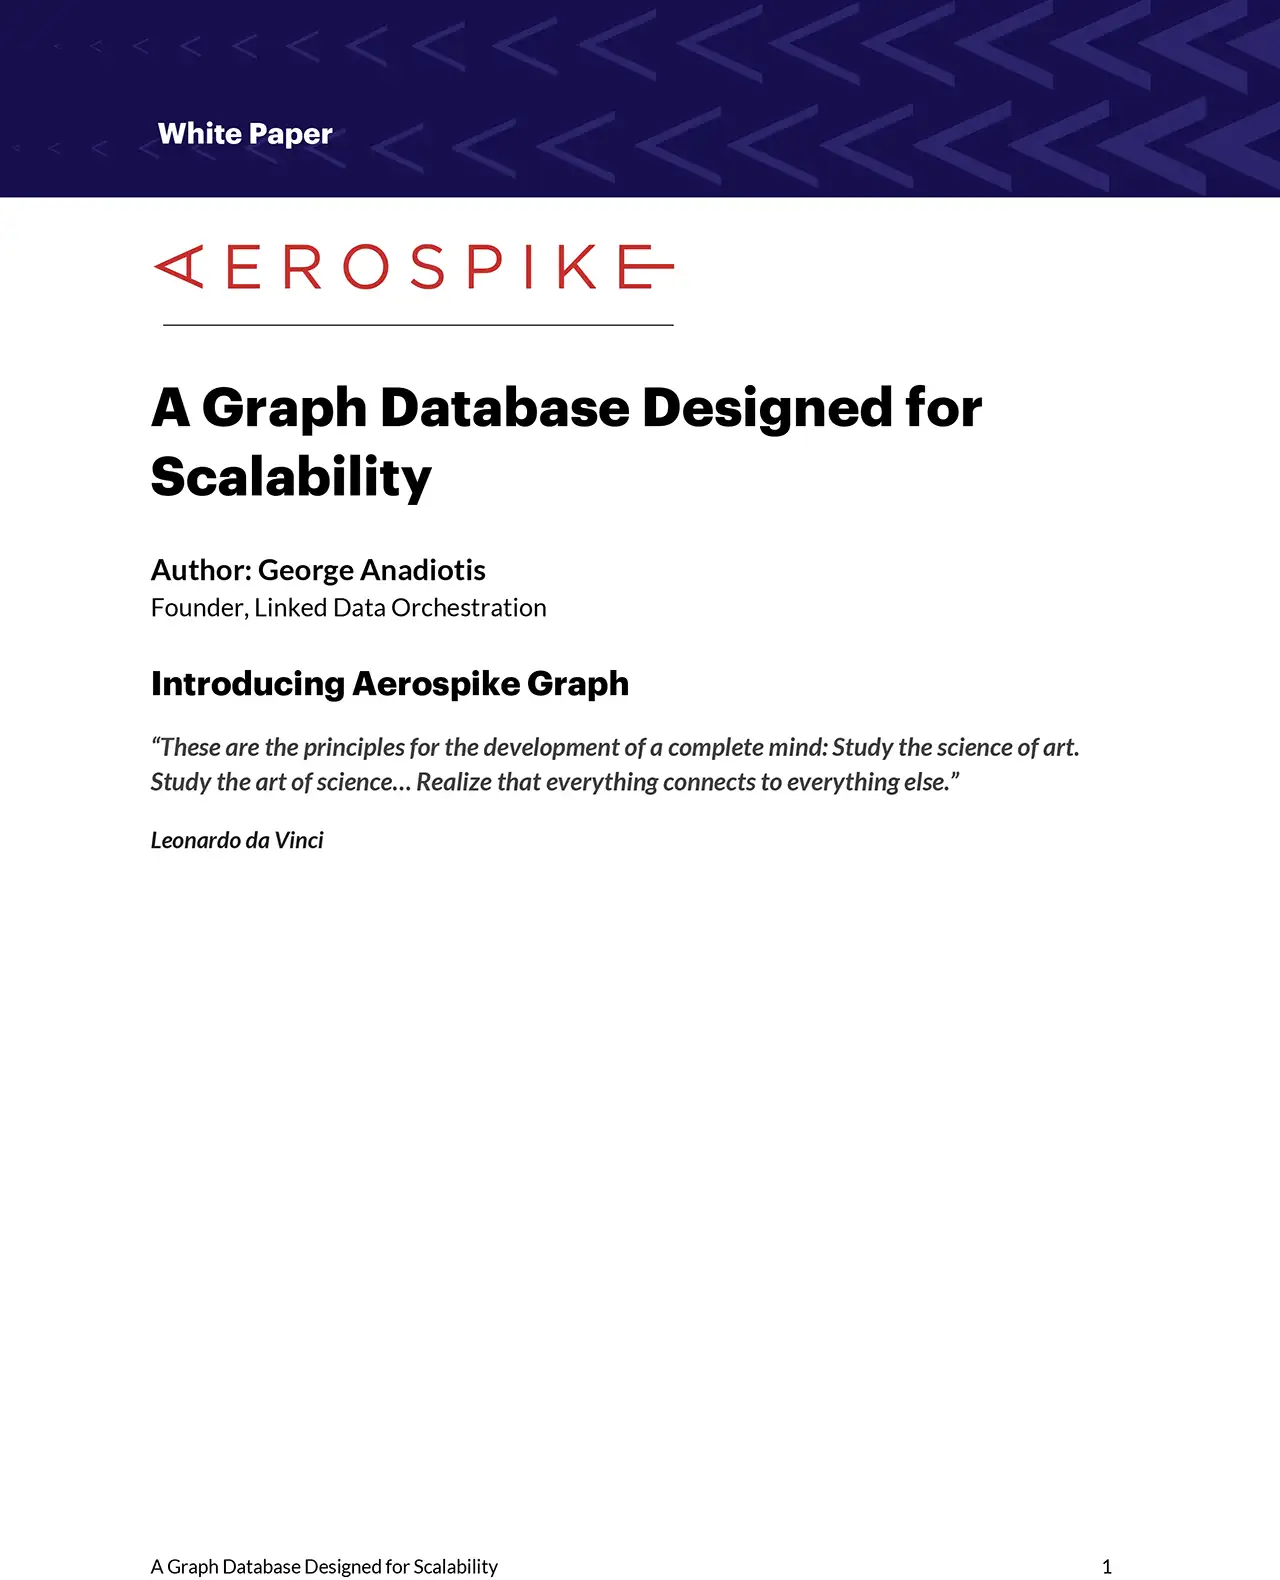 A graph database designed for scalability